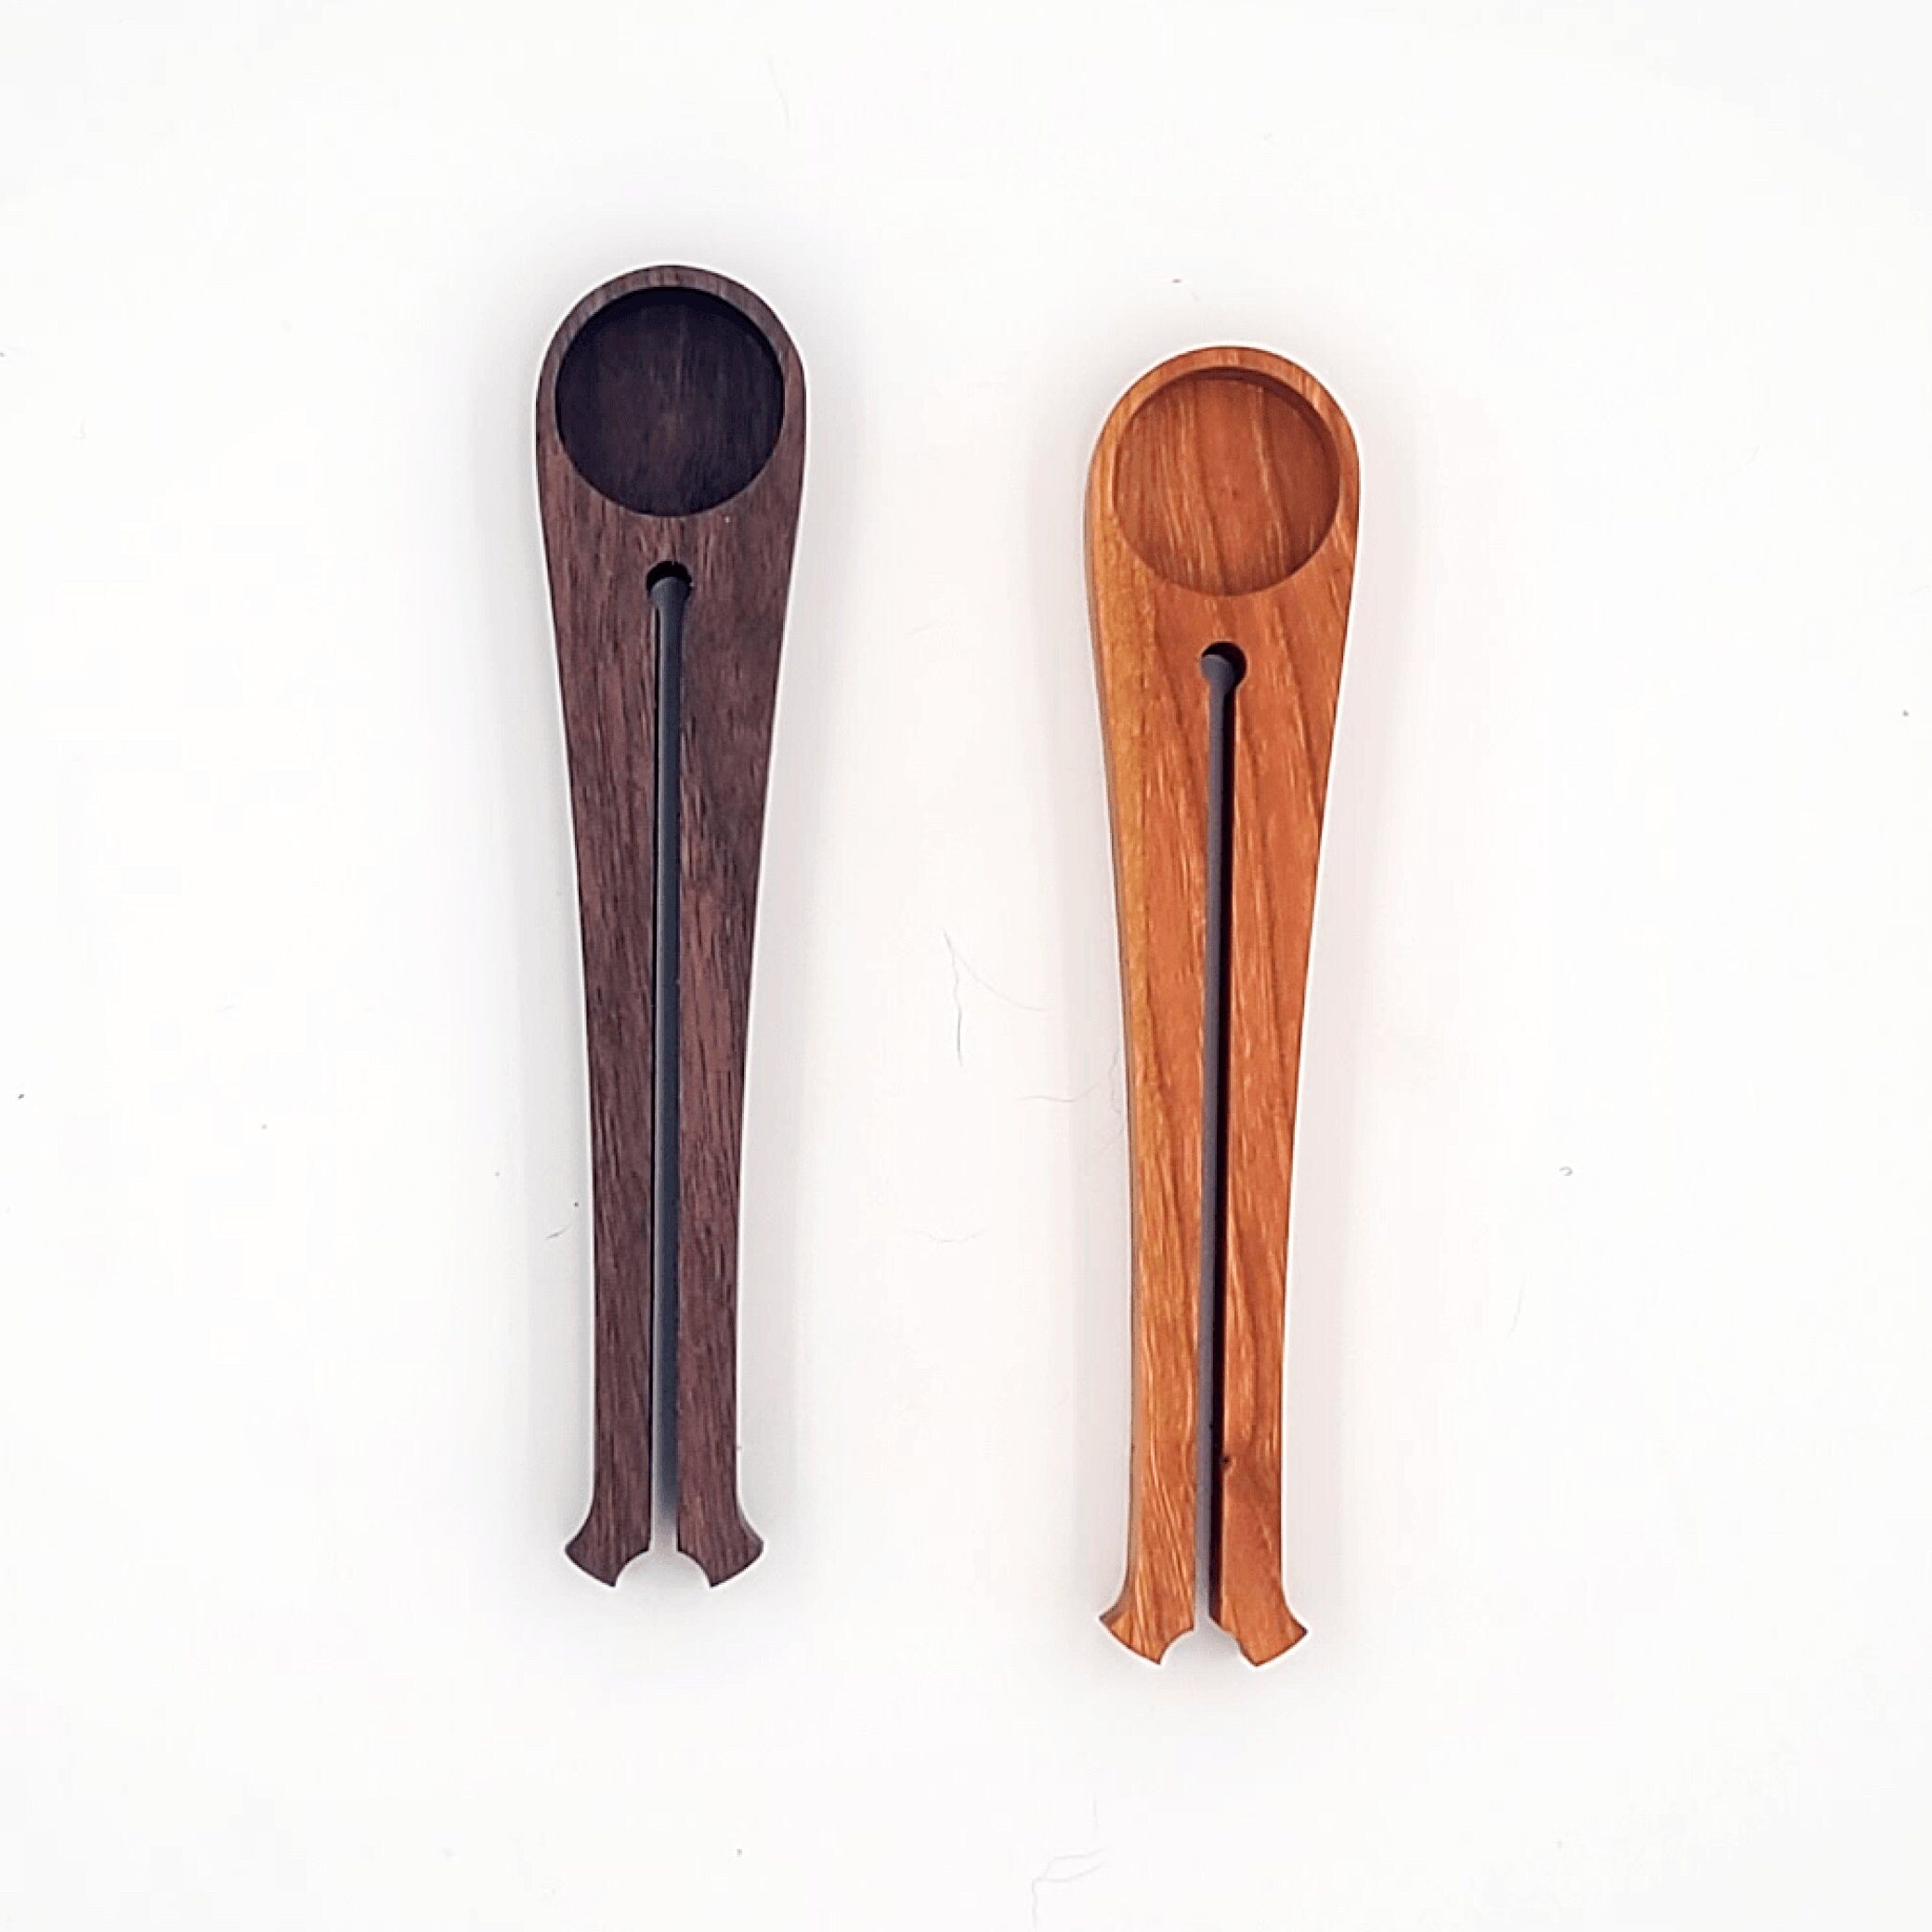 Wood Coffee Clip and Scoop - Coffee Clip - CraterGoods